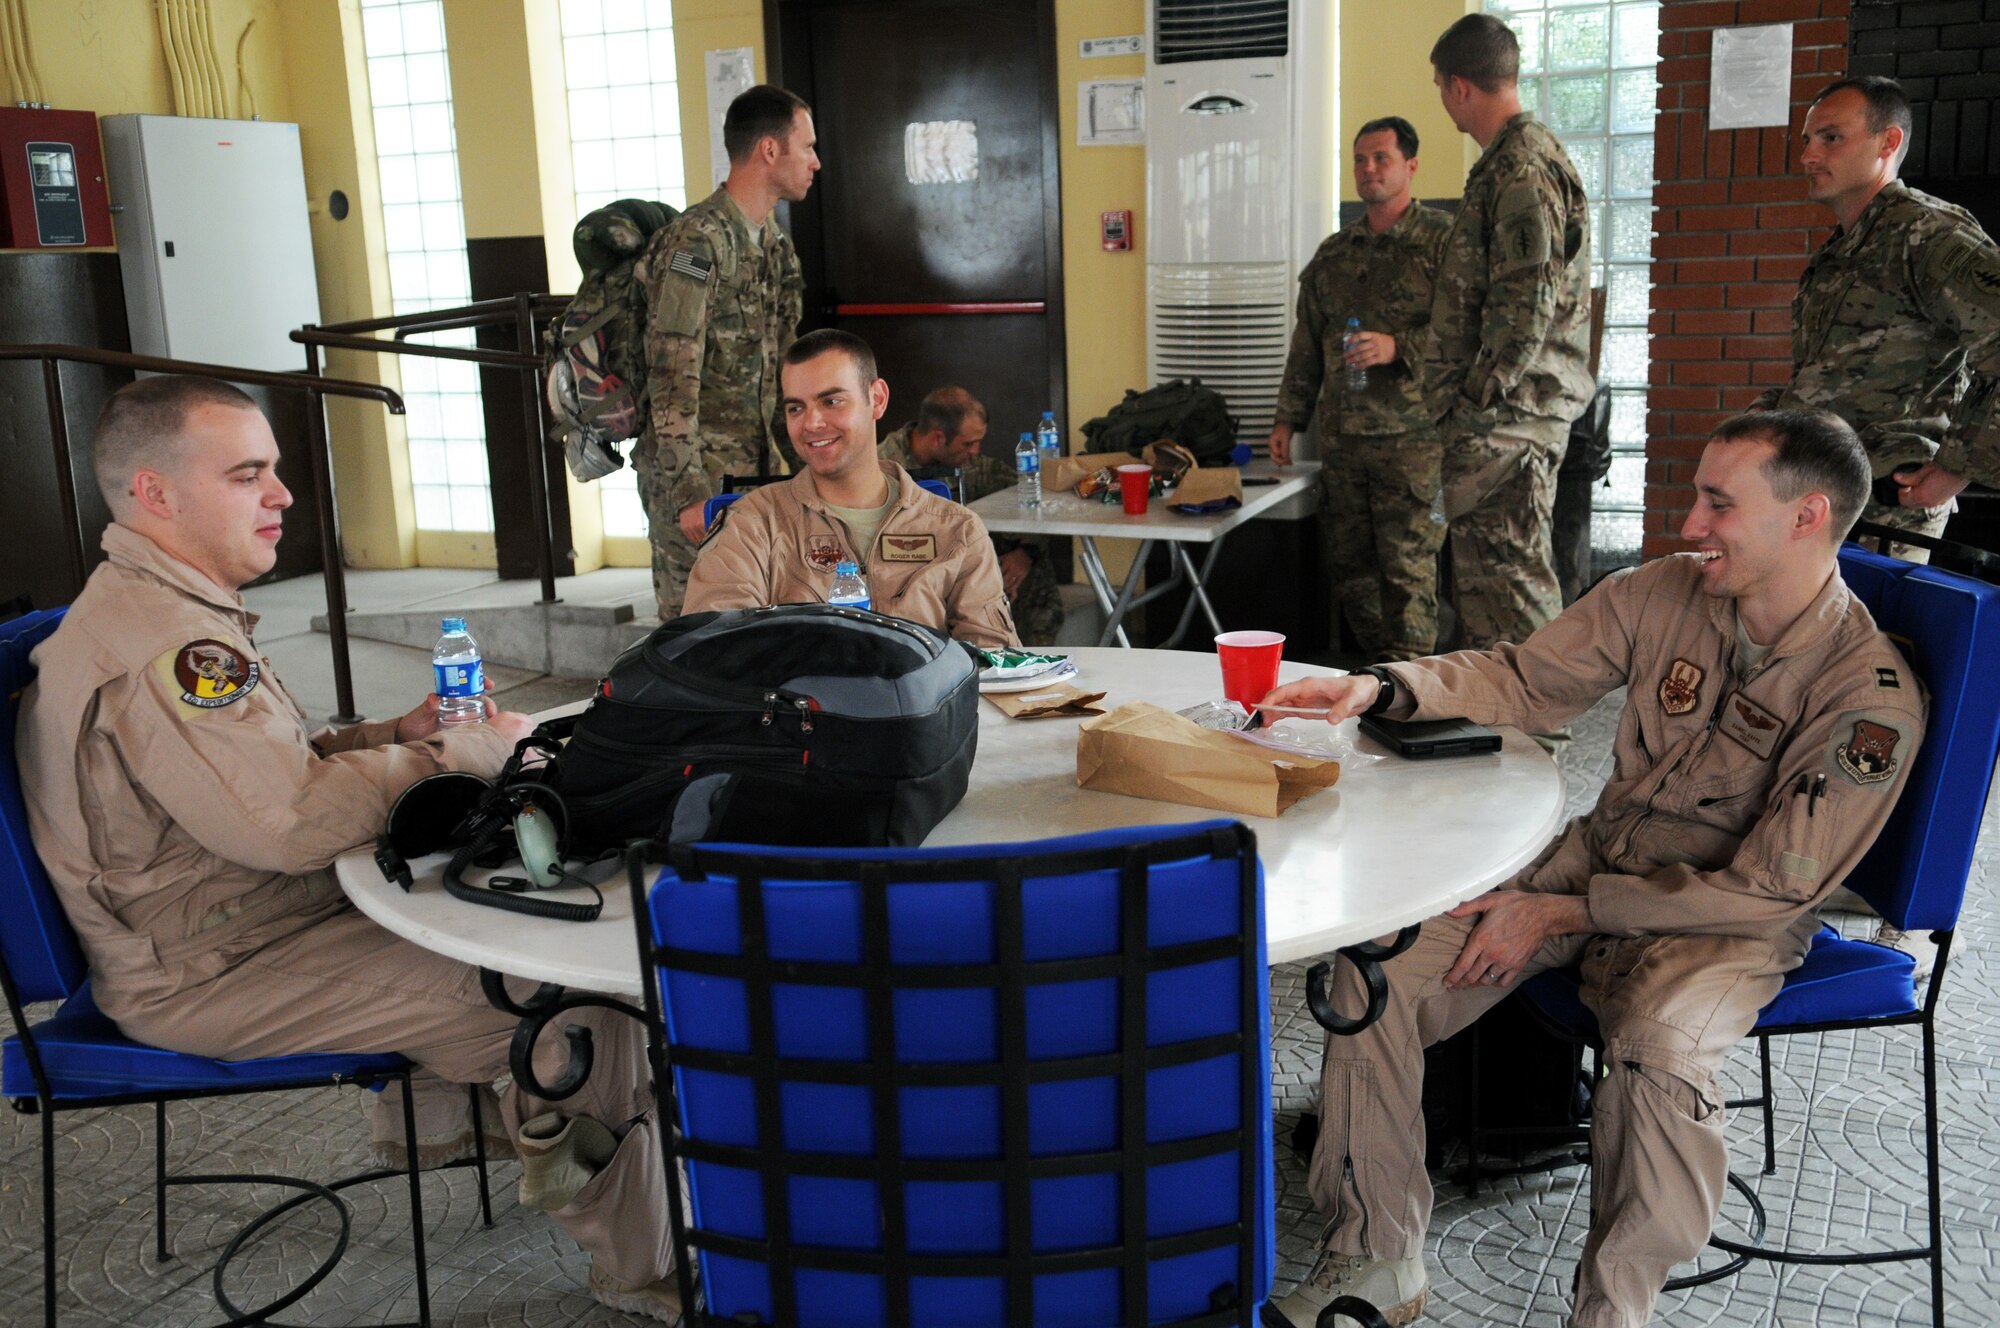 Redeploying aircrew members share a laugh after receiving drinks and snacks provided by Operation First Stop while on a layover May 12, 2012 at Incirlik Air Base, Turkey. Operation First Stop is a community service project created by Incirlik Airman Leadership Class 12-D to provide snacks and drinks to redeploying service members traveling though Incirlik. (U.S. Air Force photo by Senior Airman Marissa Tucker/Released)


